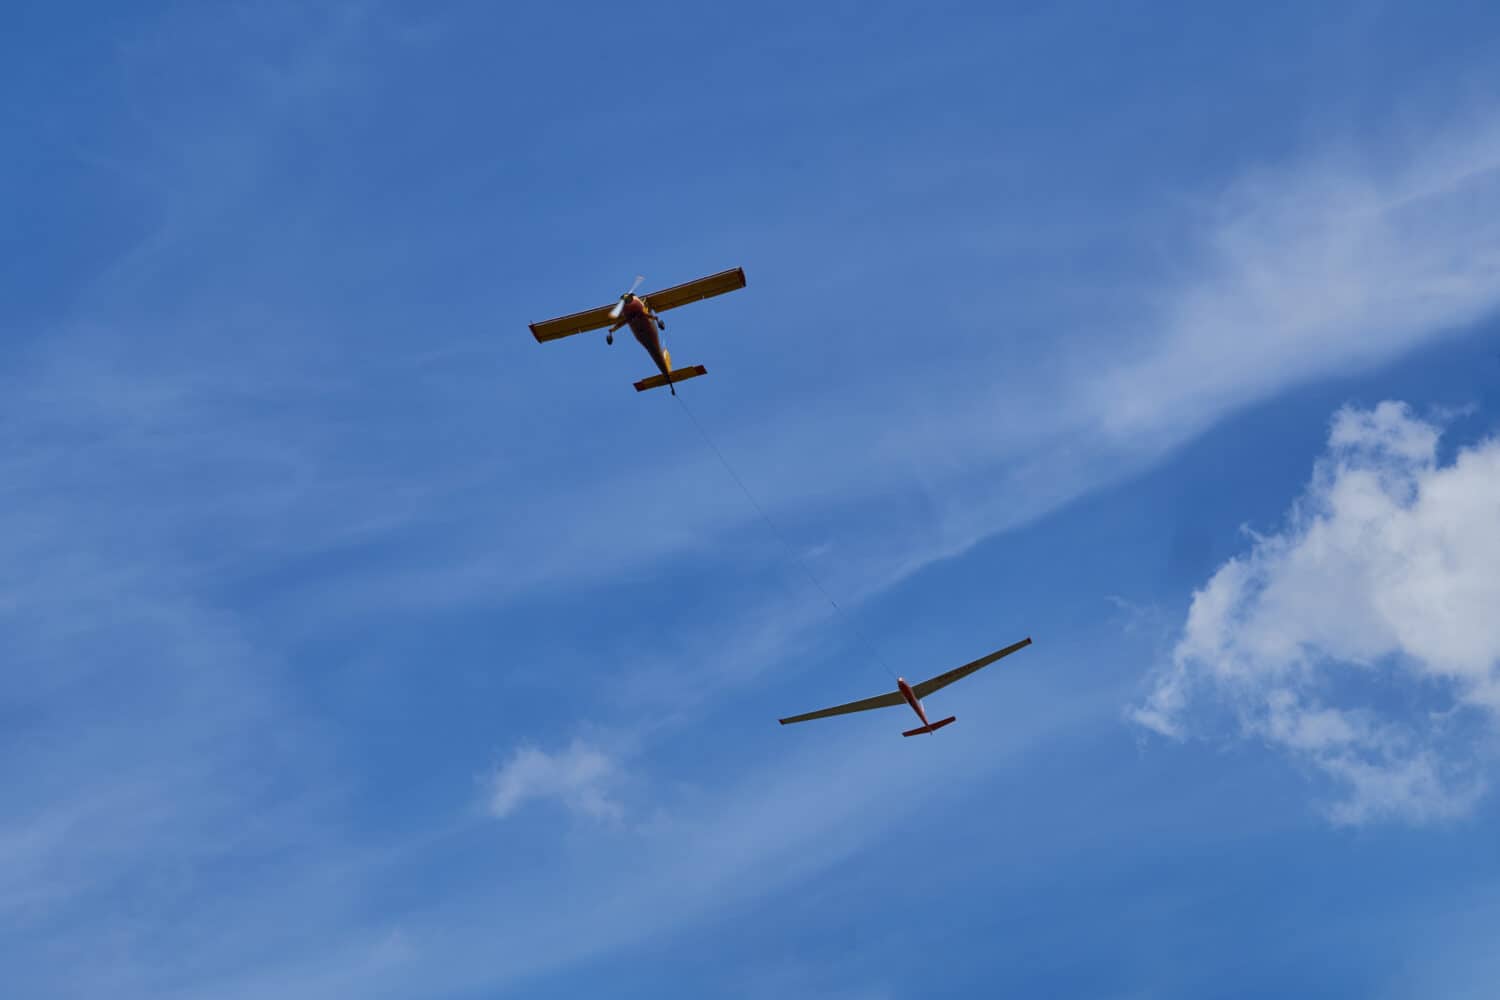 two aircraft flying in the blue sky.